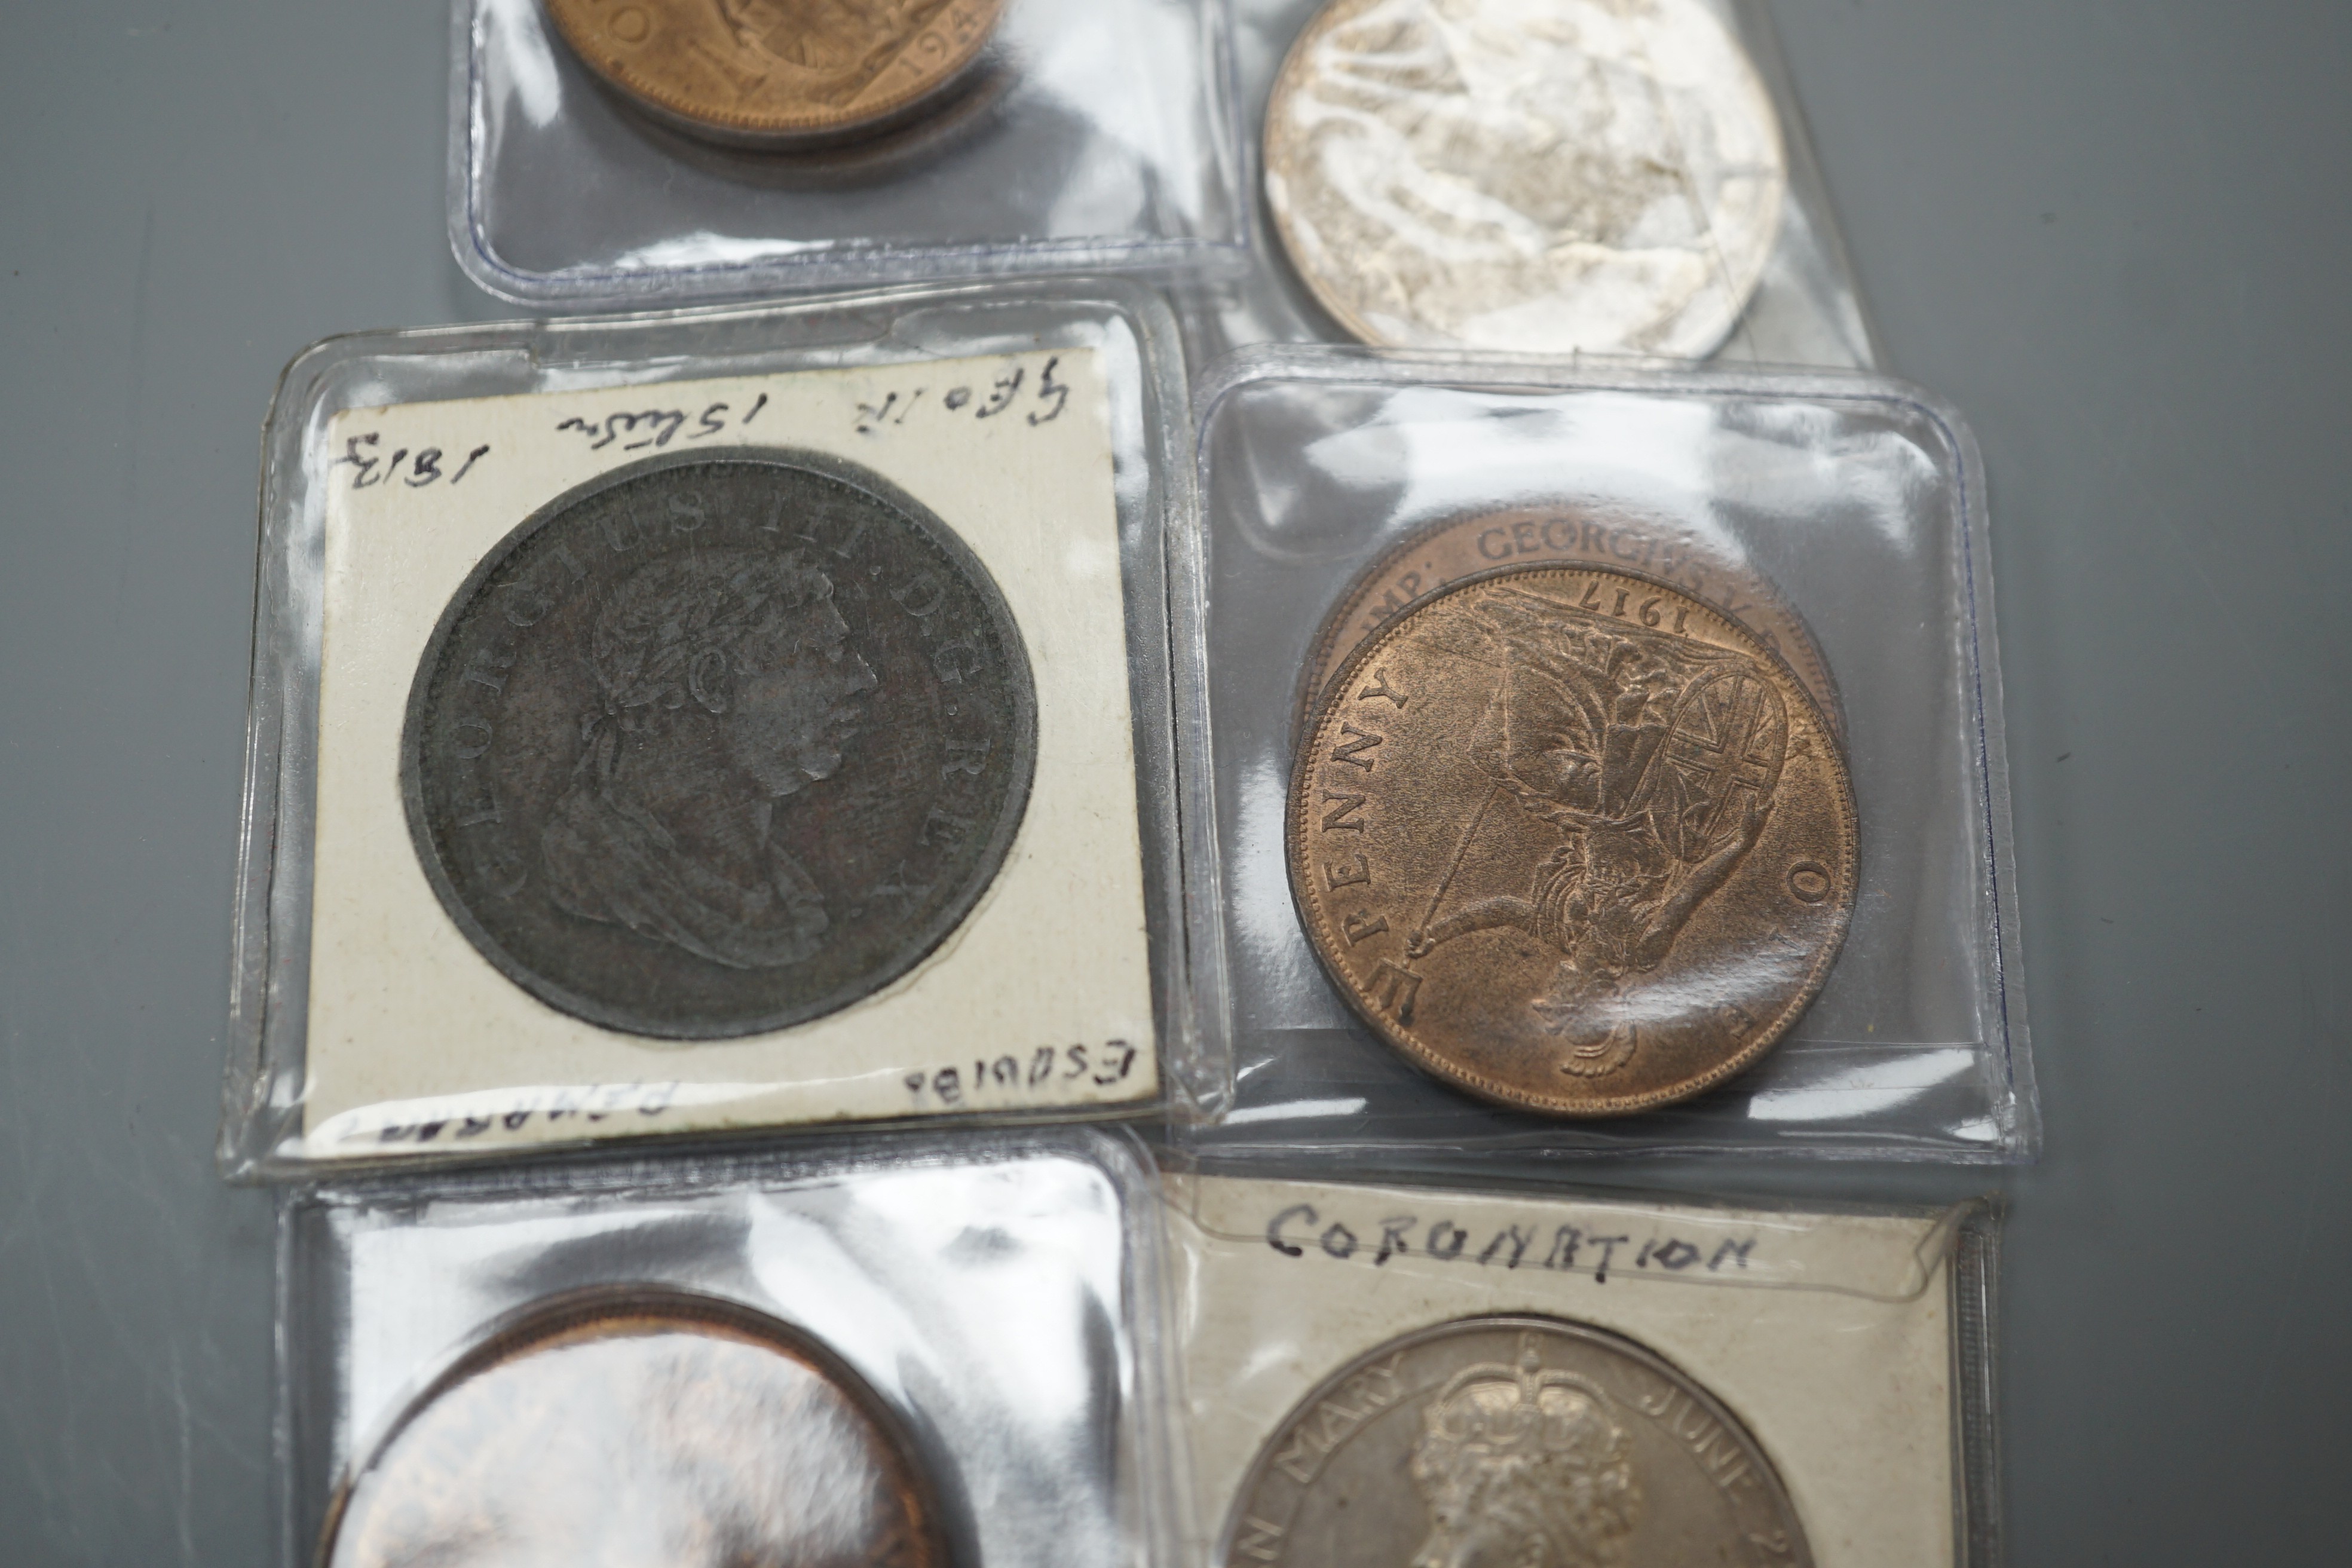 Two silver coronation medals: Edward VII and Queen Alexandria and George V and Queen Mary, both EF, and a George III copper One silver oken, six one pennies, a Kennedy 1964 half dollar and other Chinese coins